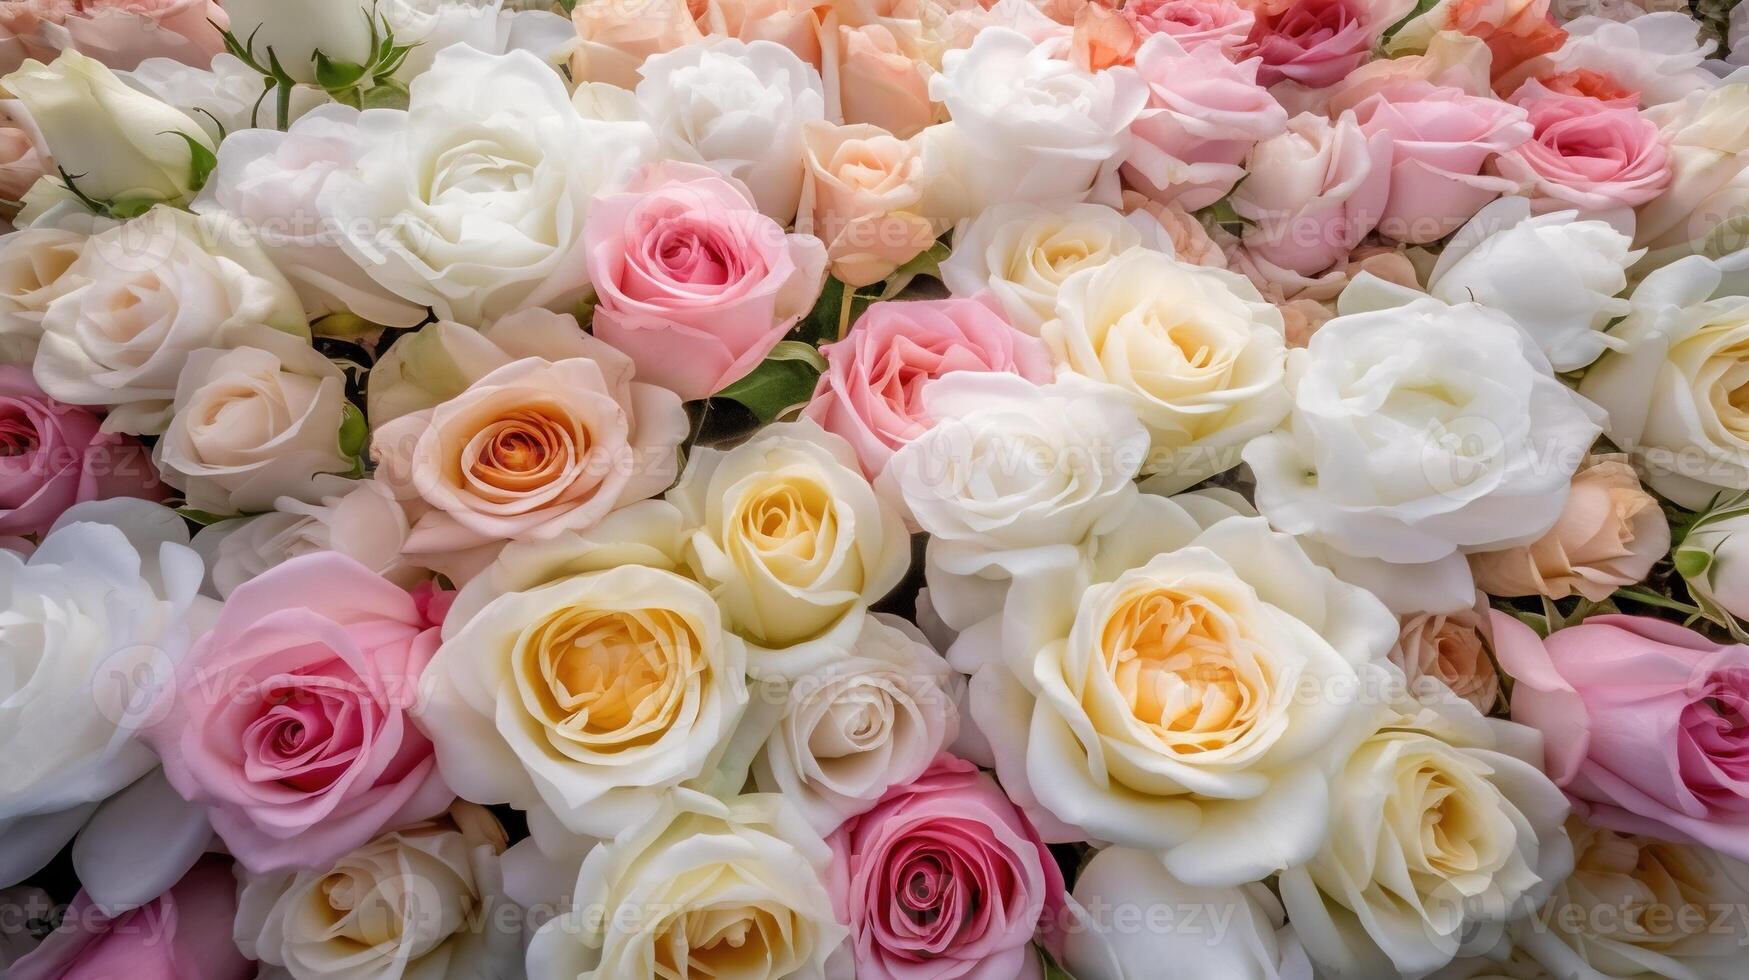 , flowers wall background with white and light pink fresh roses, pastel and soft bouquet floral card photo